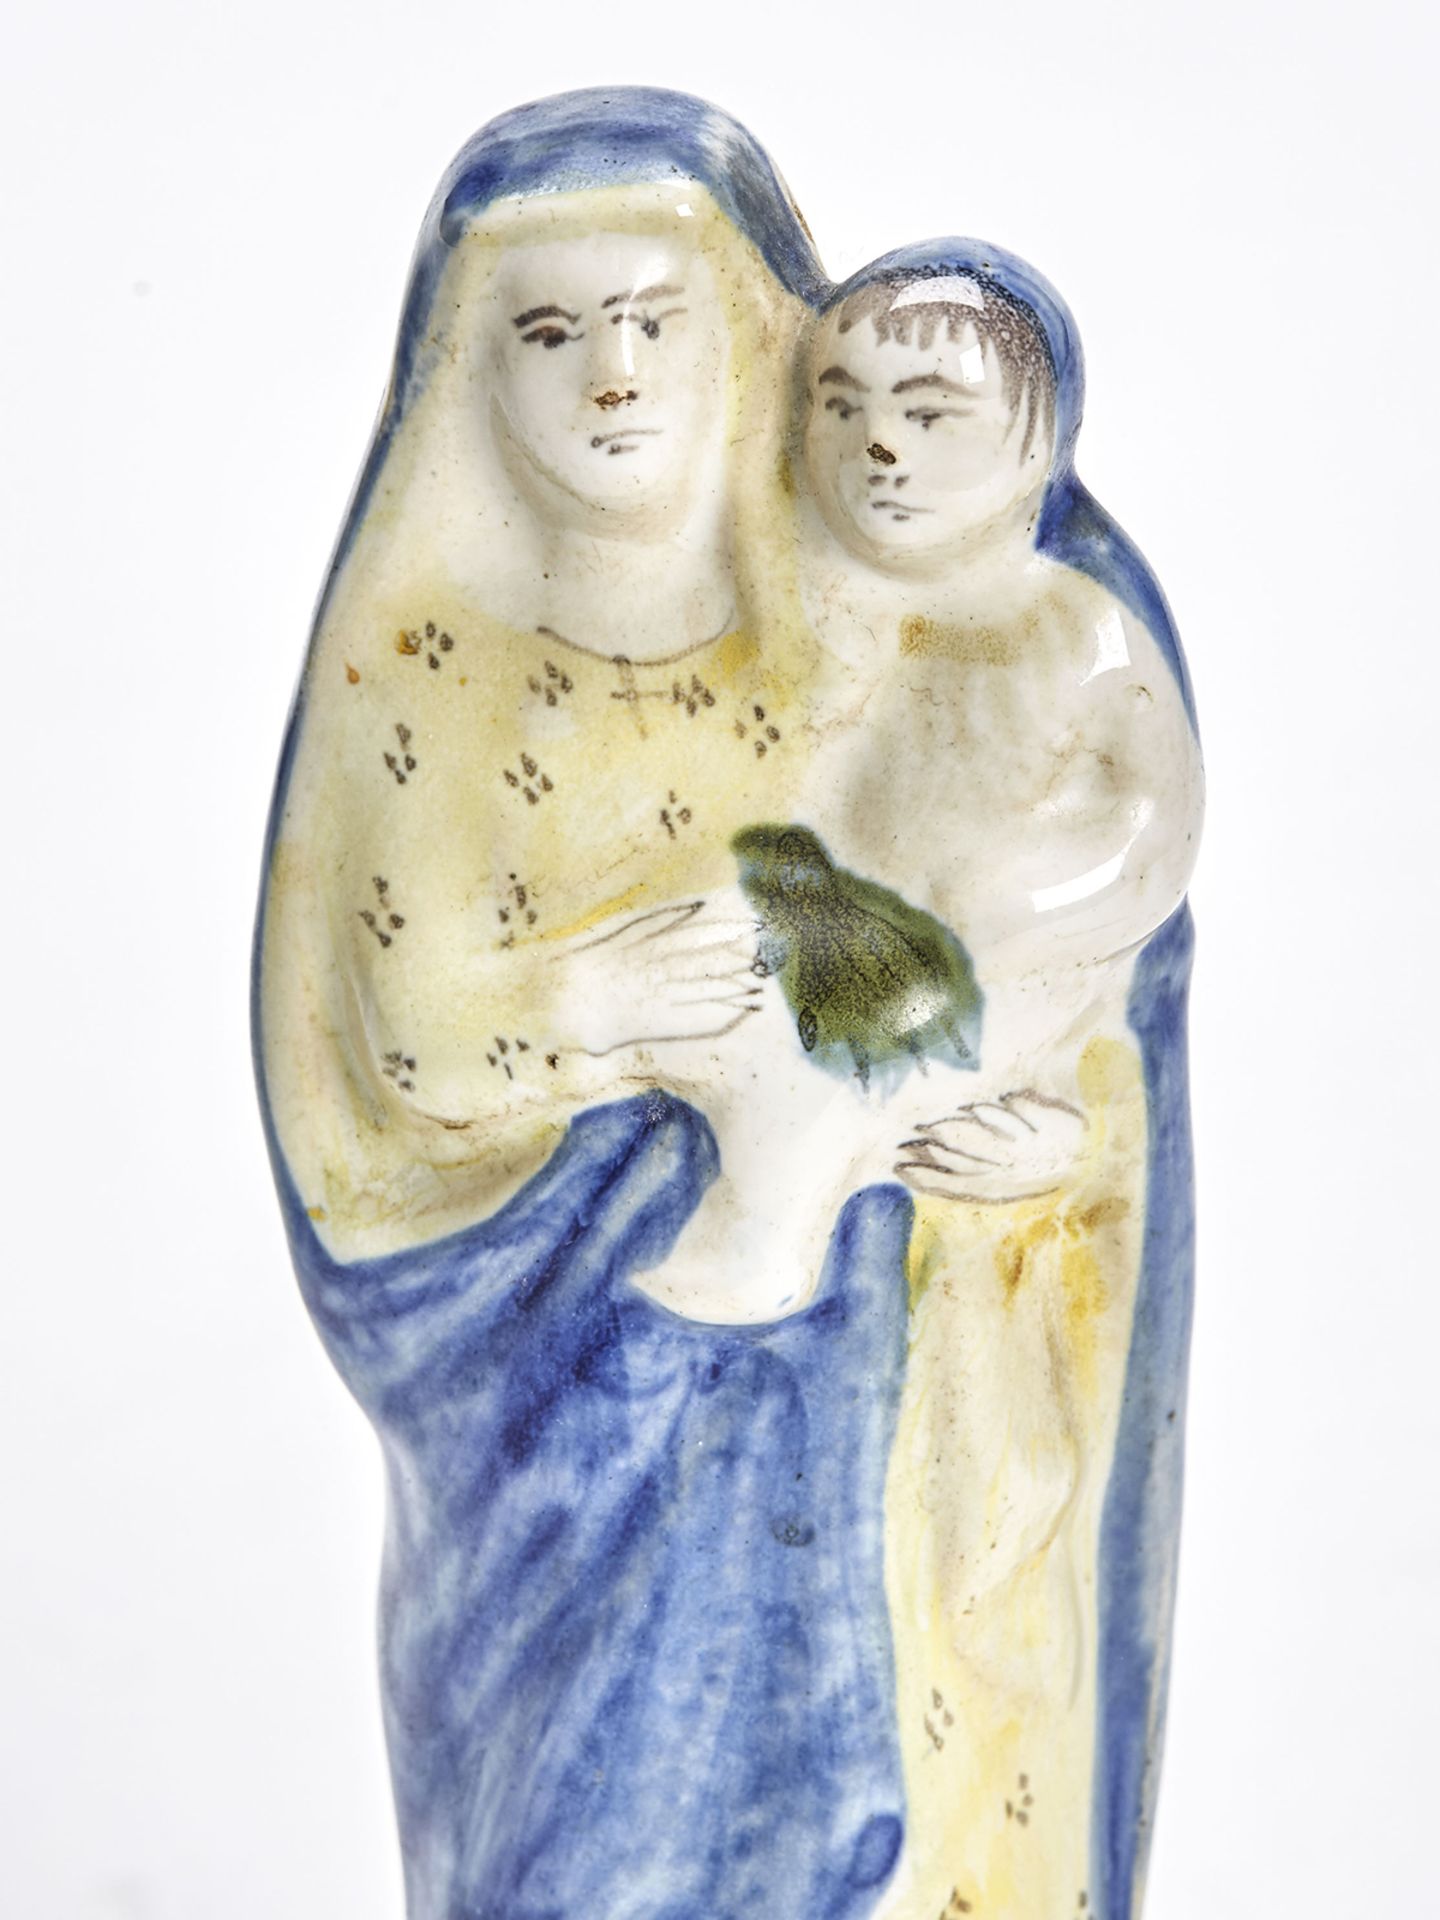 ANTIQUE FRENCH HENRIOT QUIMPER VIRGIN MARY FIGURE c.1900 - Image 2 of 7